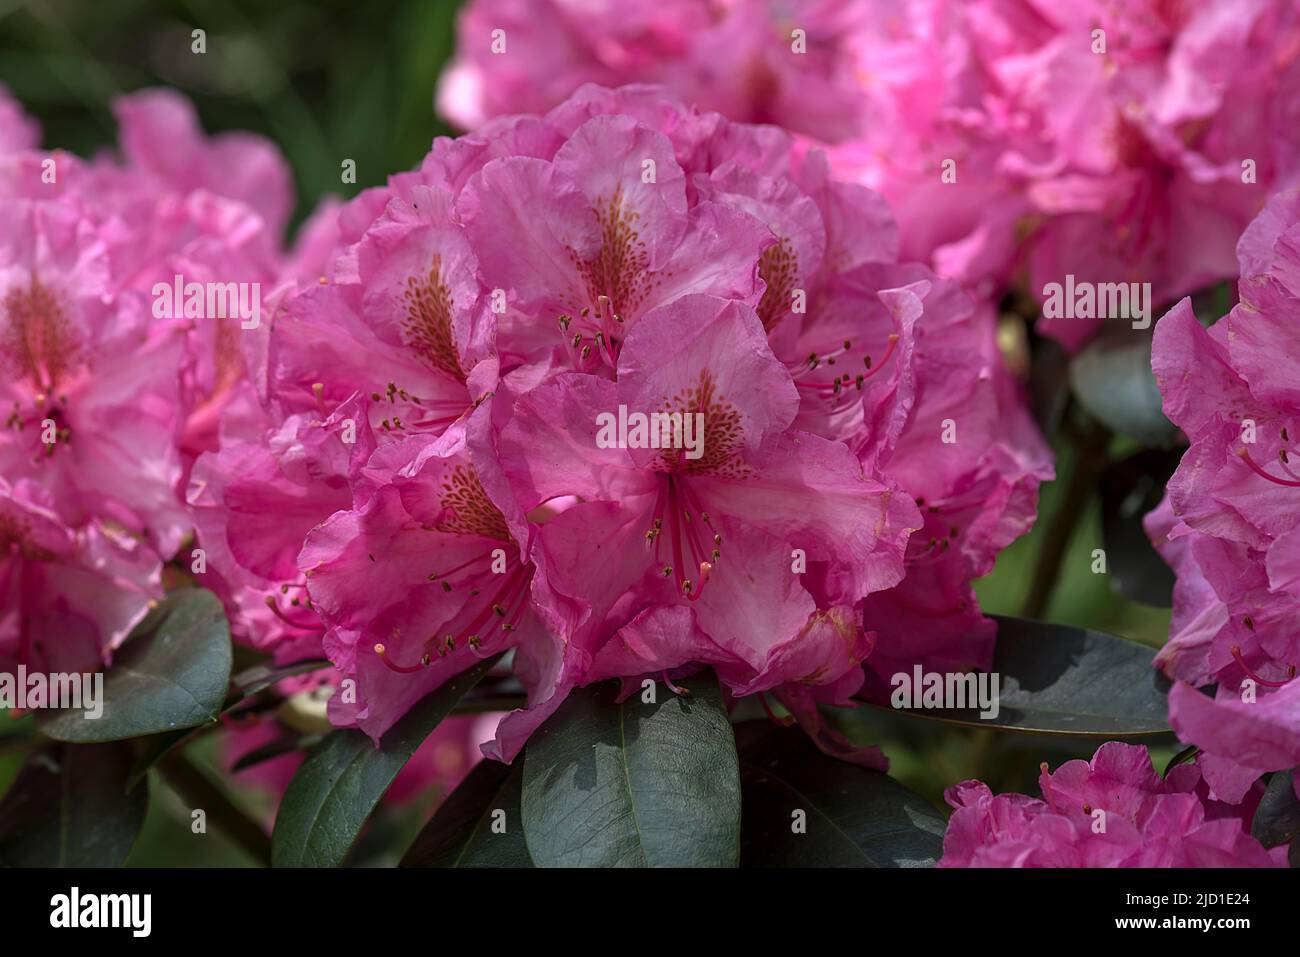 Red rhododendrons (Rhododendron), Bavaria, Germany Stock Photo